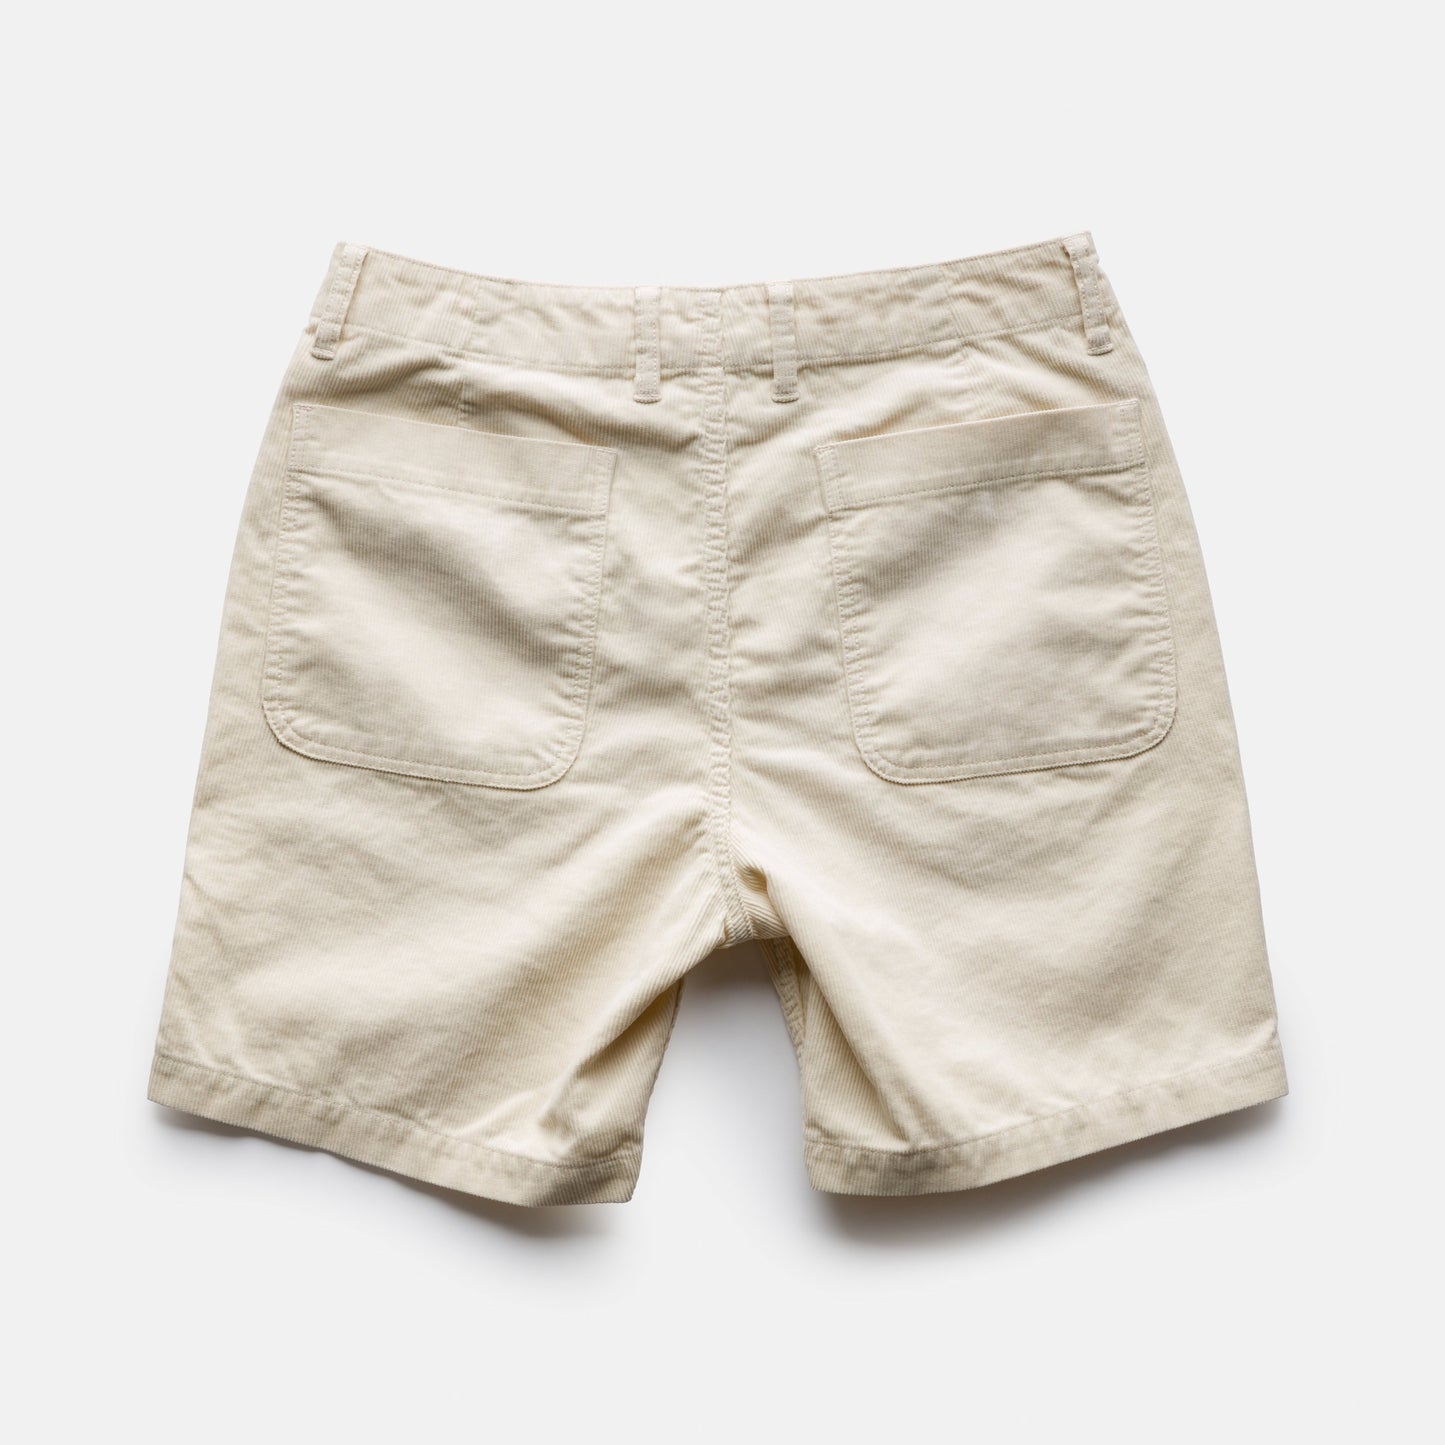 the Black Bear Brand コーデュロイショーツ Washed IVORY